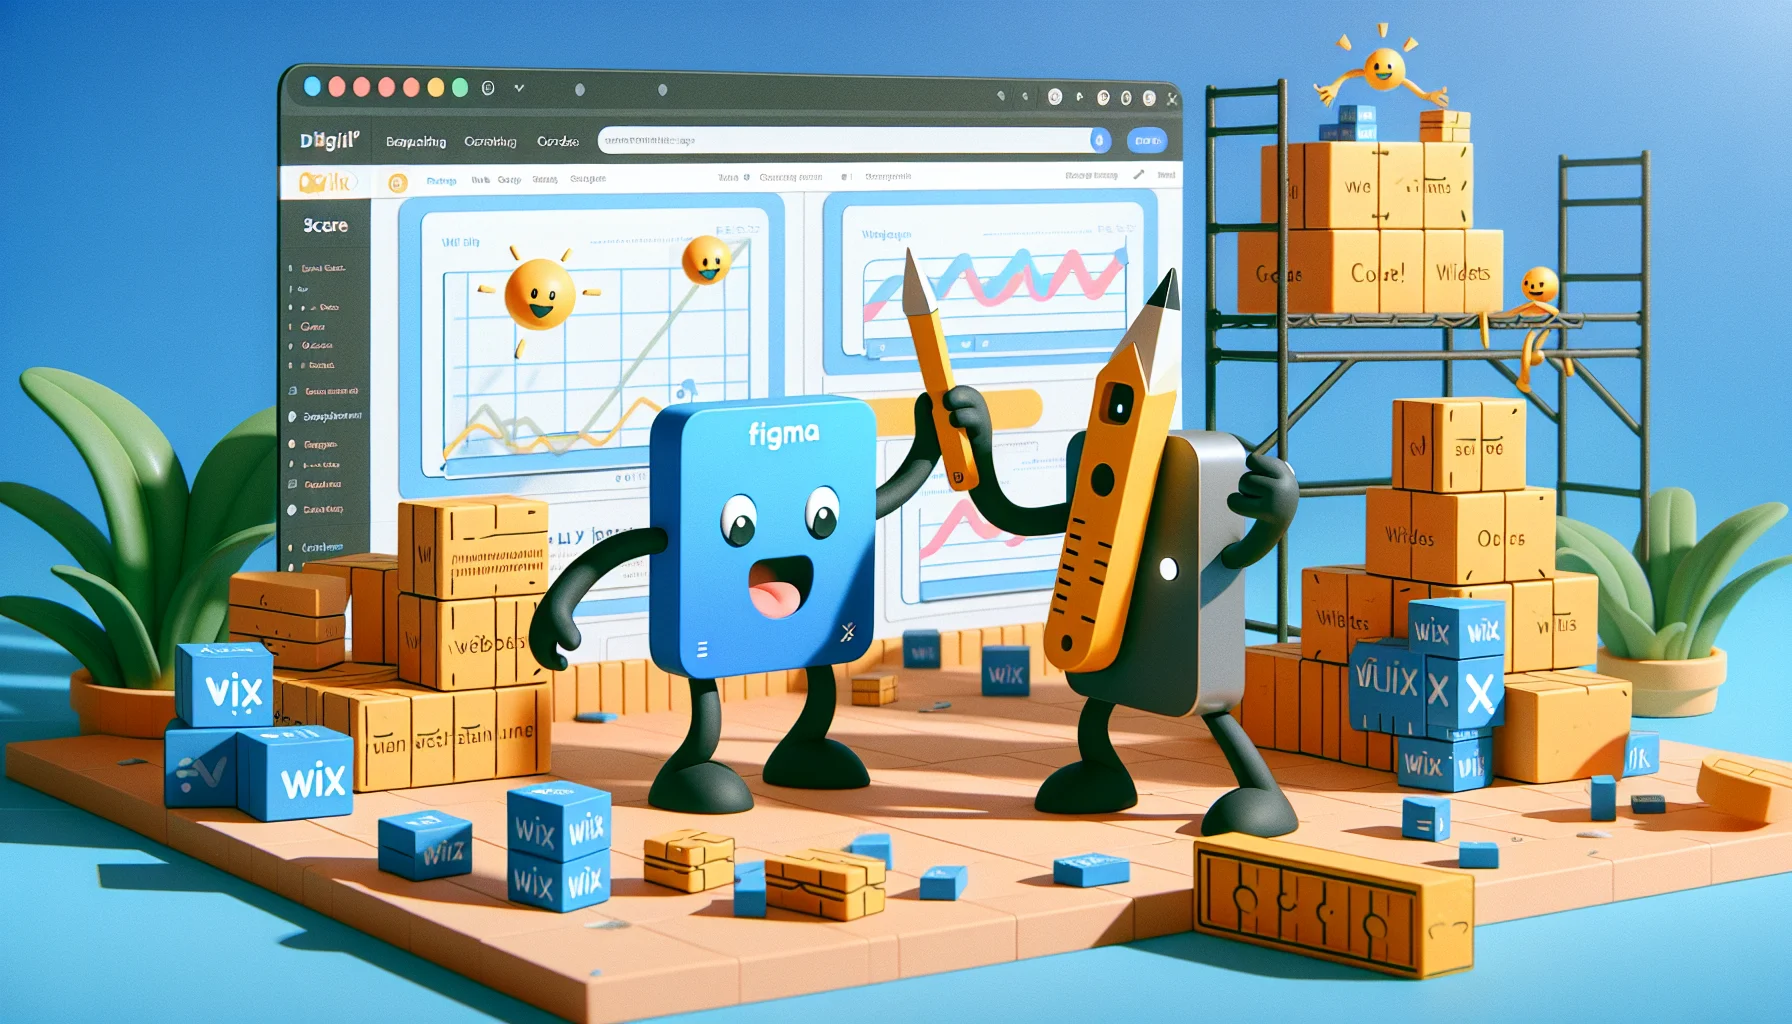 Visualize an amusing scenario where we see symbolized characters representing two digital tools - Figma, depicted as a flexible sketchpad, and Wix, appearing as a sturdy construction toolkit. They are engaged in a friendly competition on a website construction site. Around them, blocks of codes acting like bricks and widgets serve as the construction materials. A scoreboard in the background keeps tally dynamically on a website with appealing web hosting options, attracting visitors with humorous pop-ups and banners. The overall setting is light-hearted and enticing, inviting to web hosting.